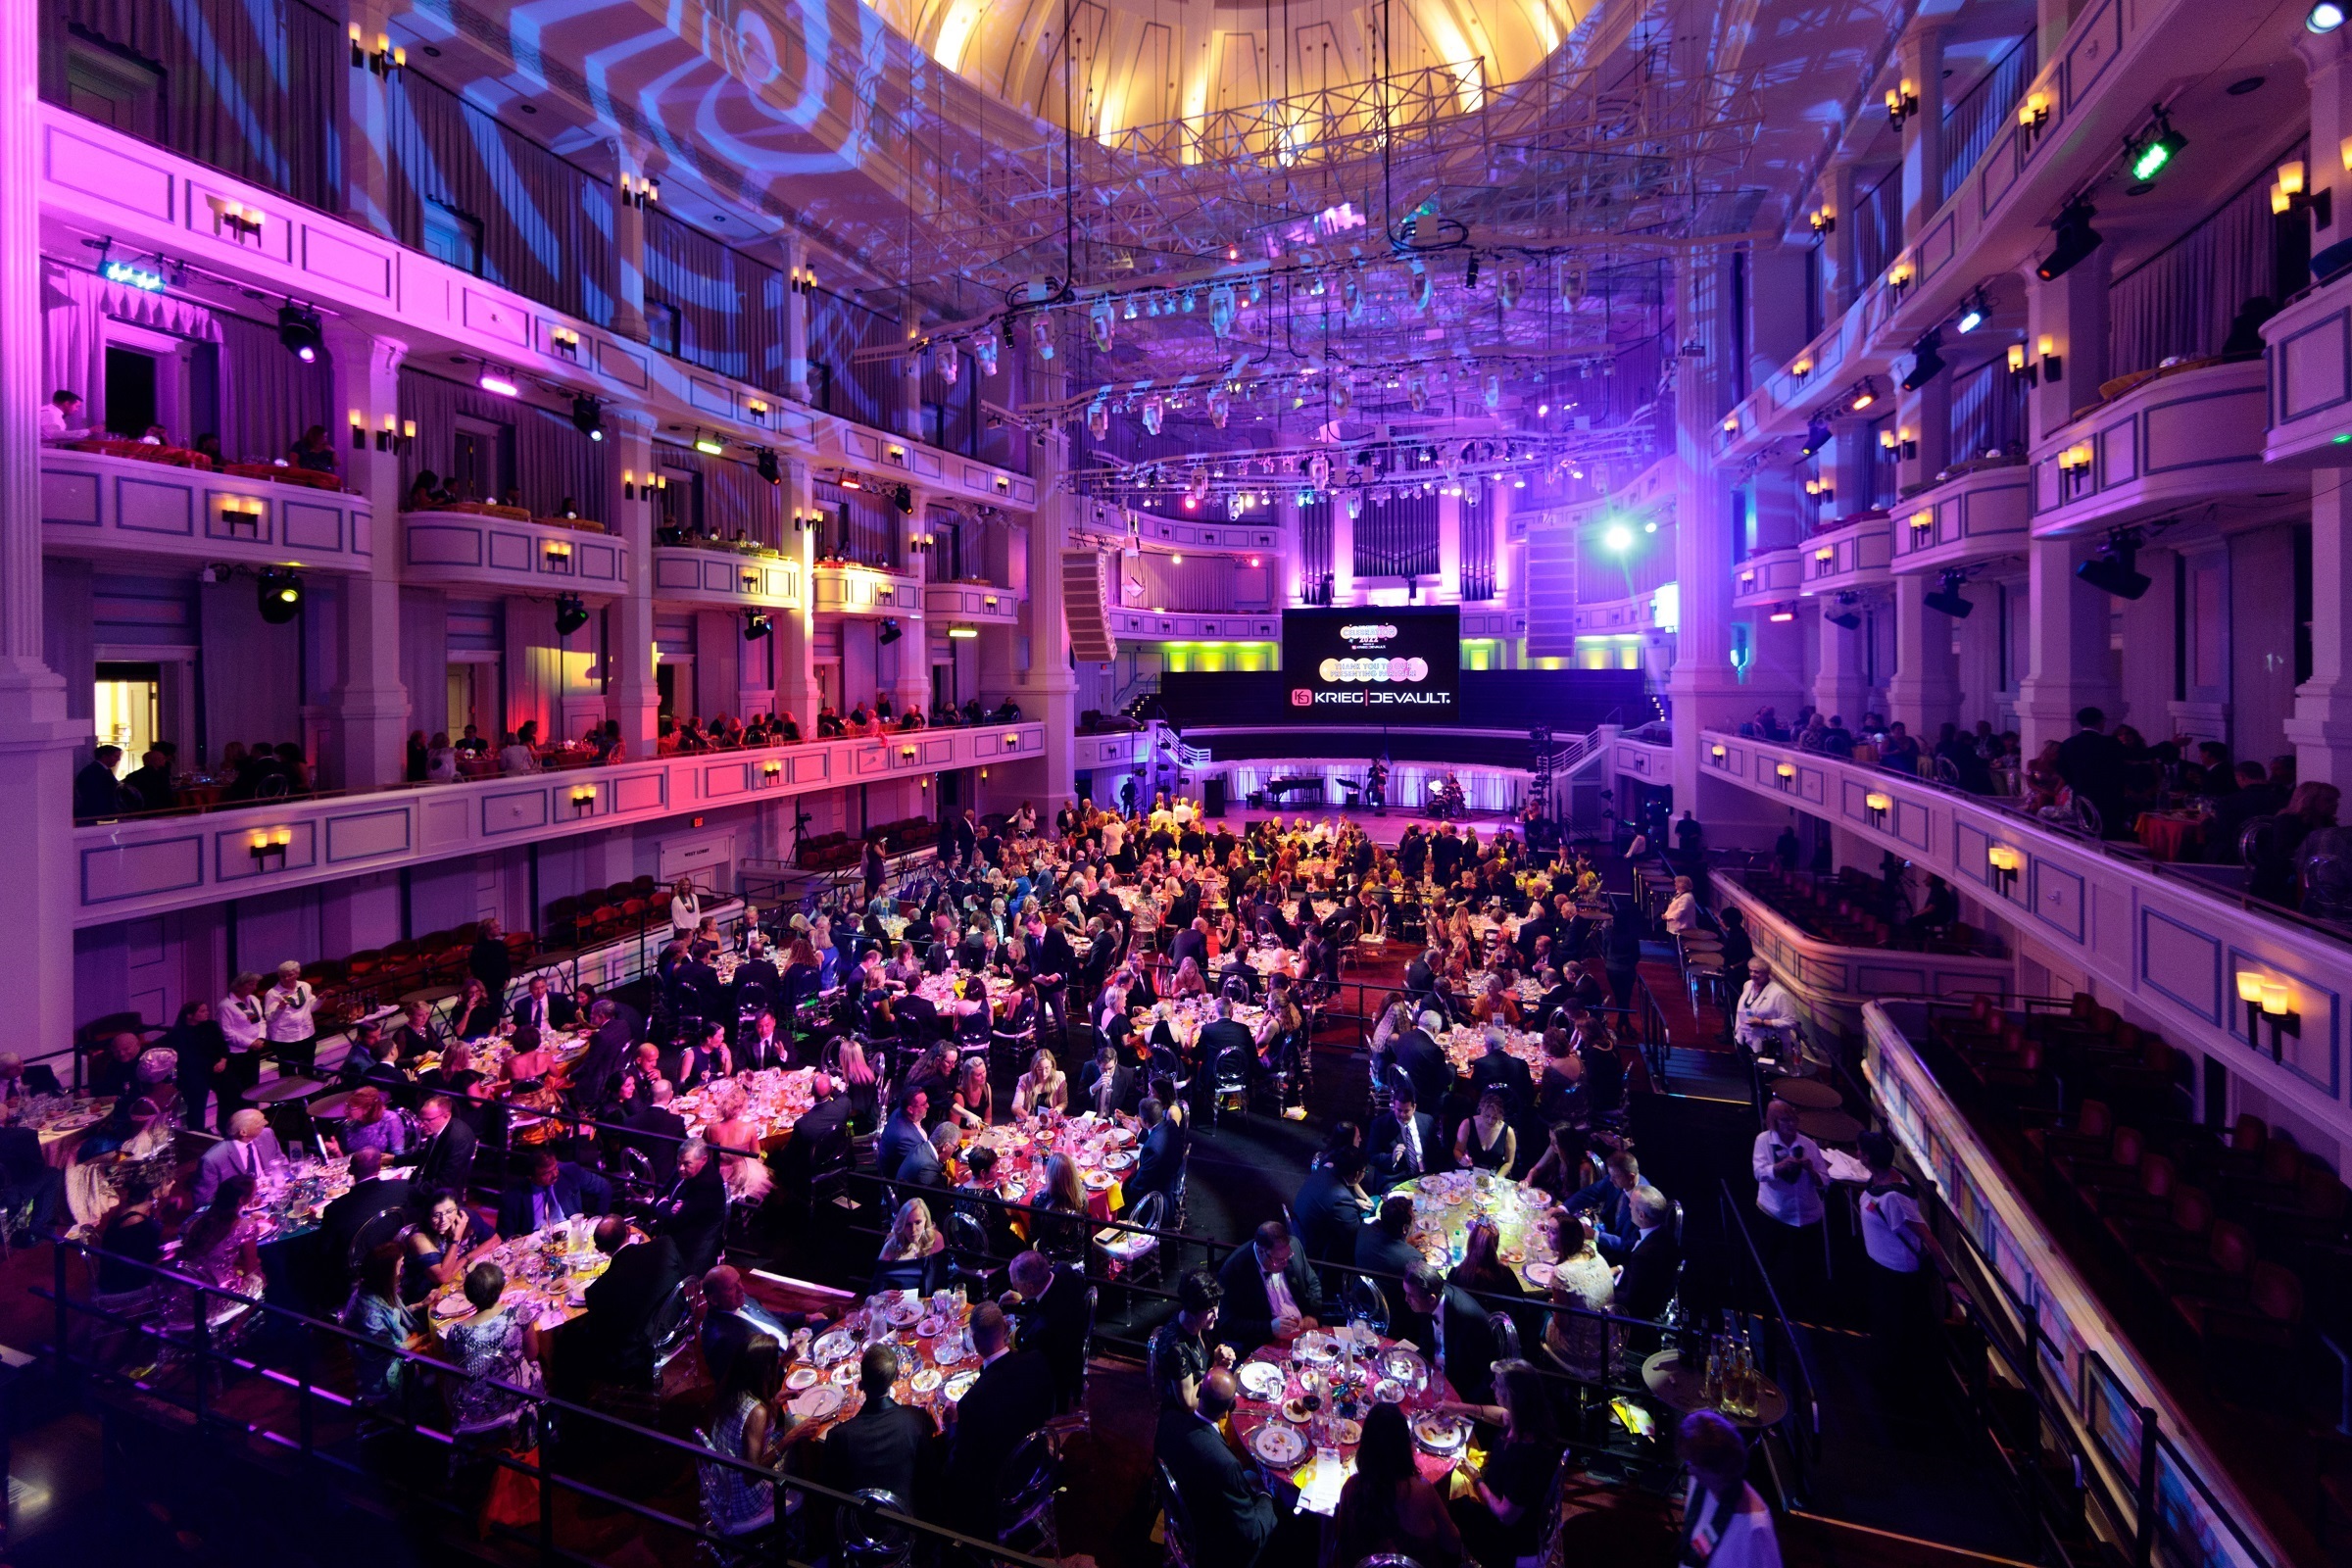 The Palladium concert hall is bathed in blue and purple light as guests dine at tables during Center Celebration 2022.